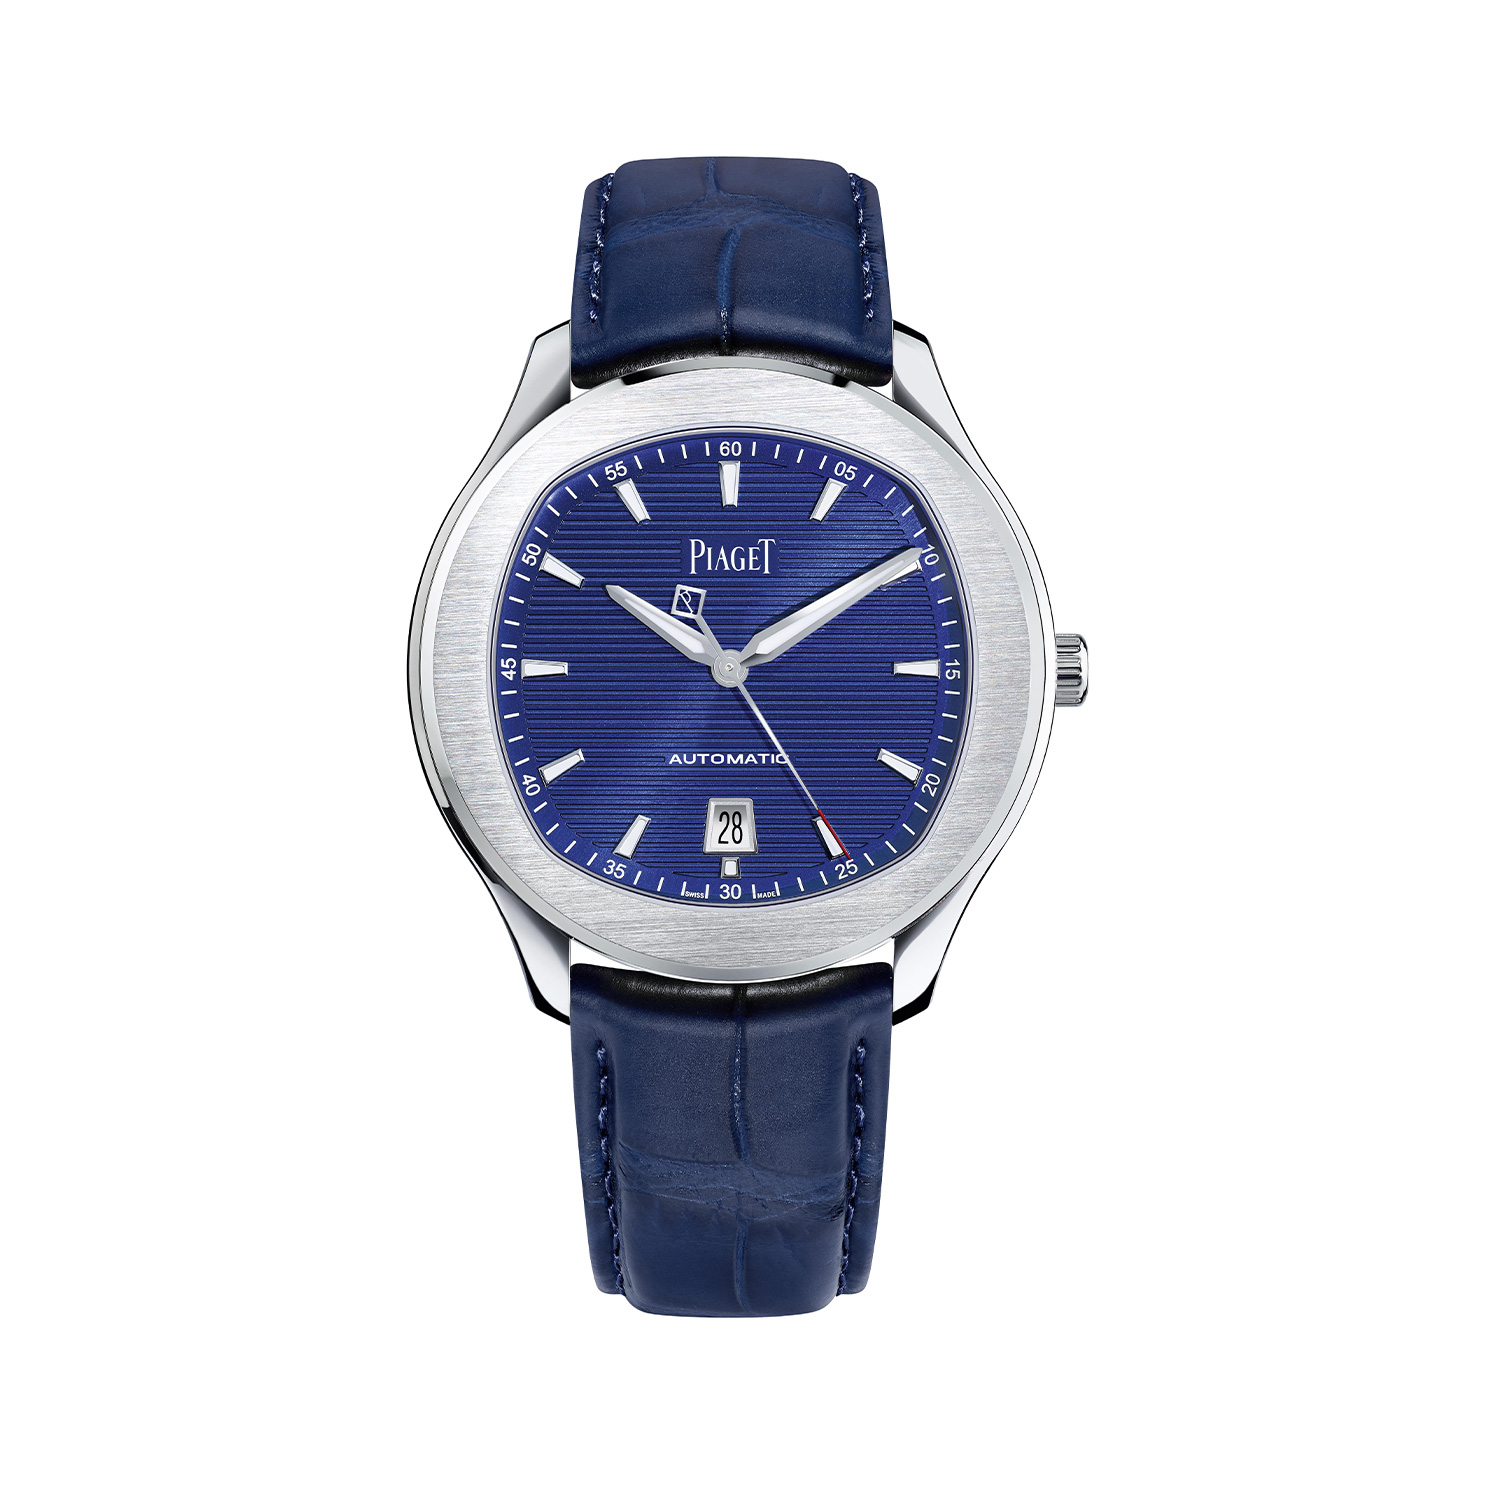 Montre piaget polo date - Piaget